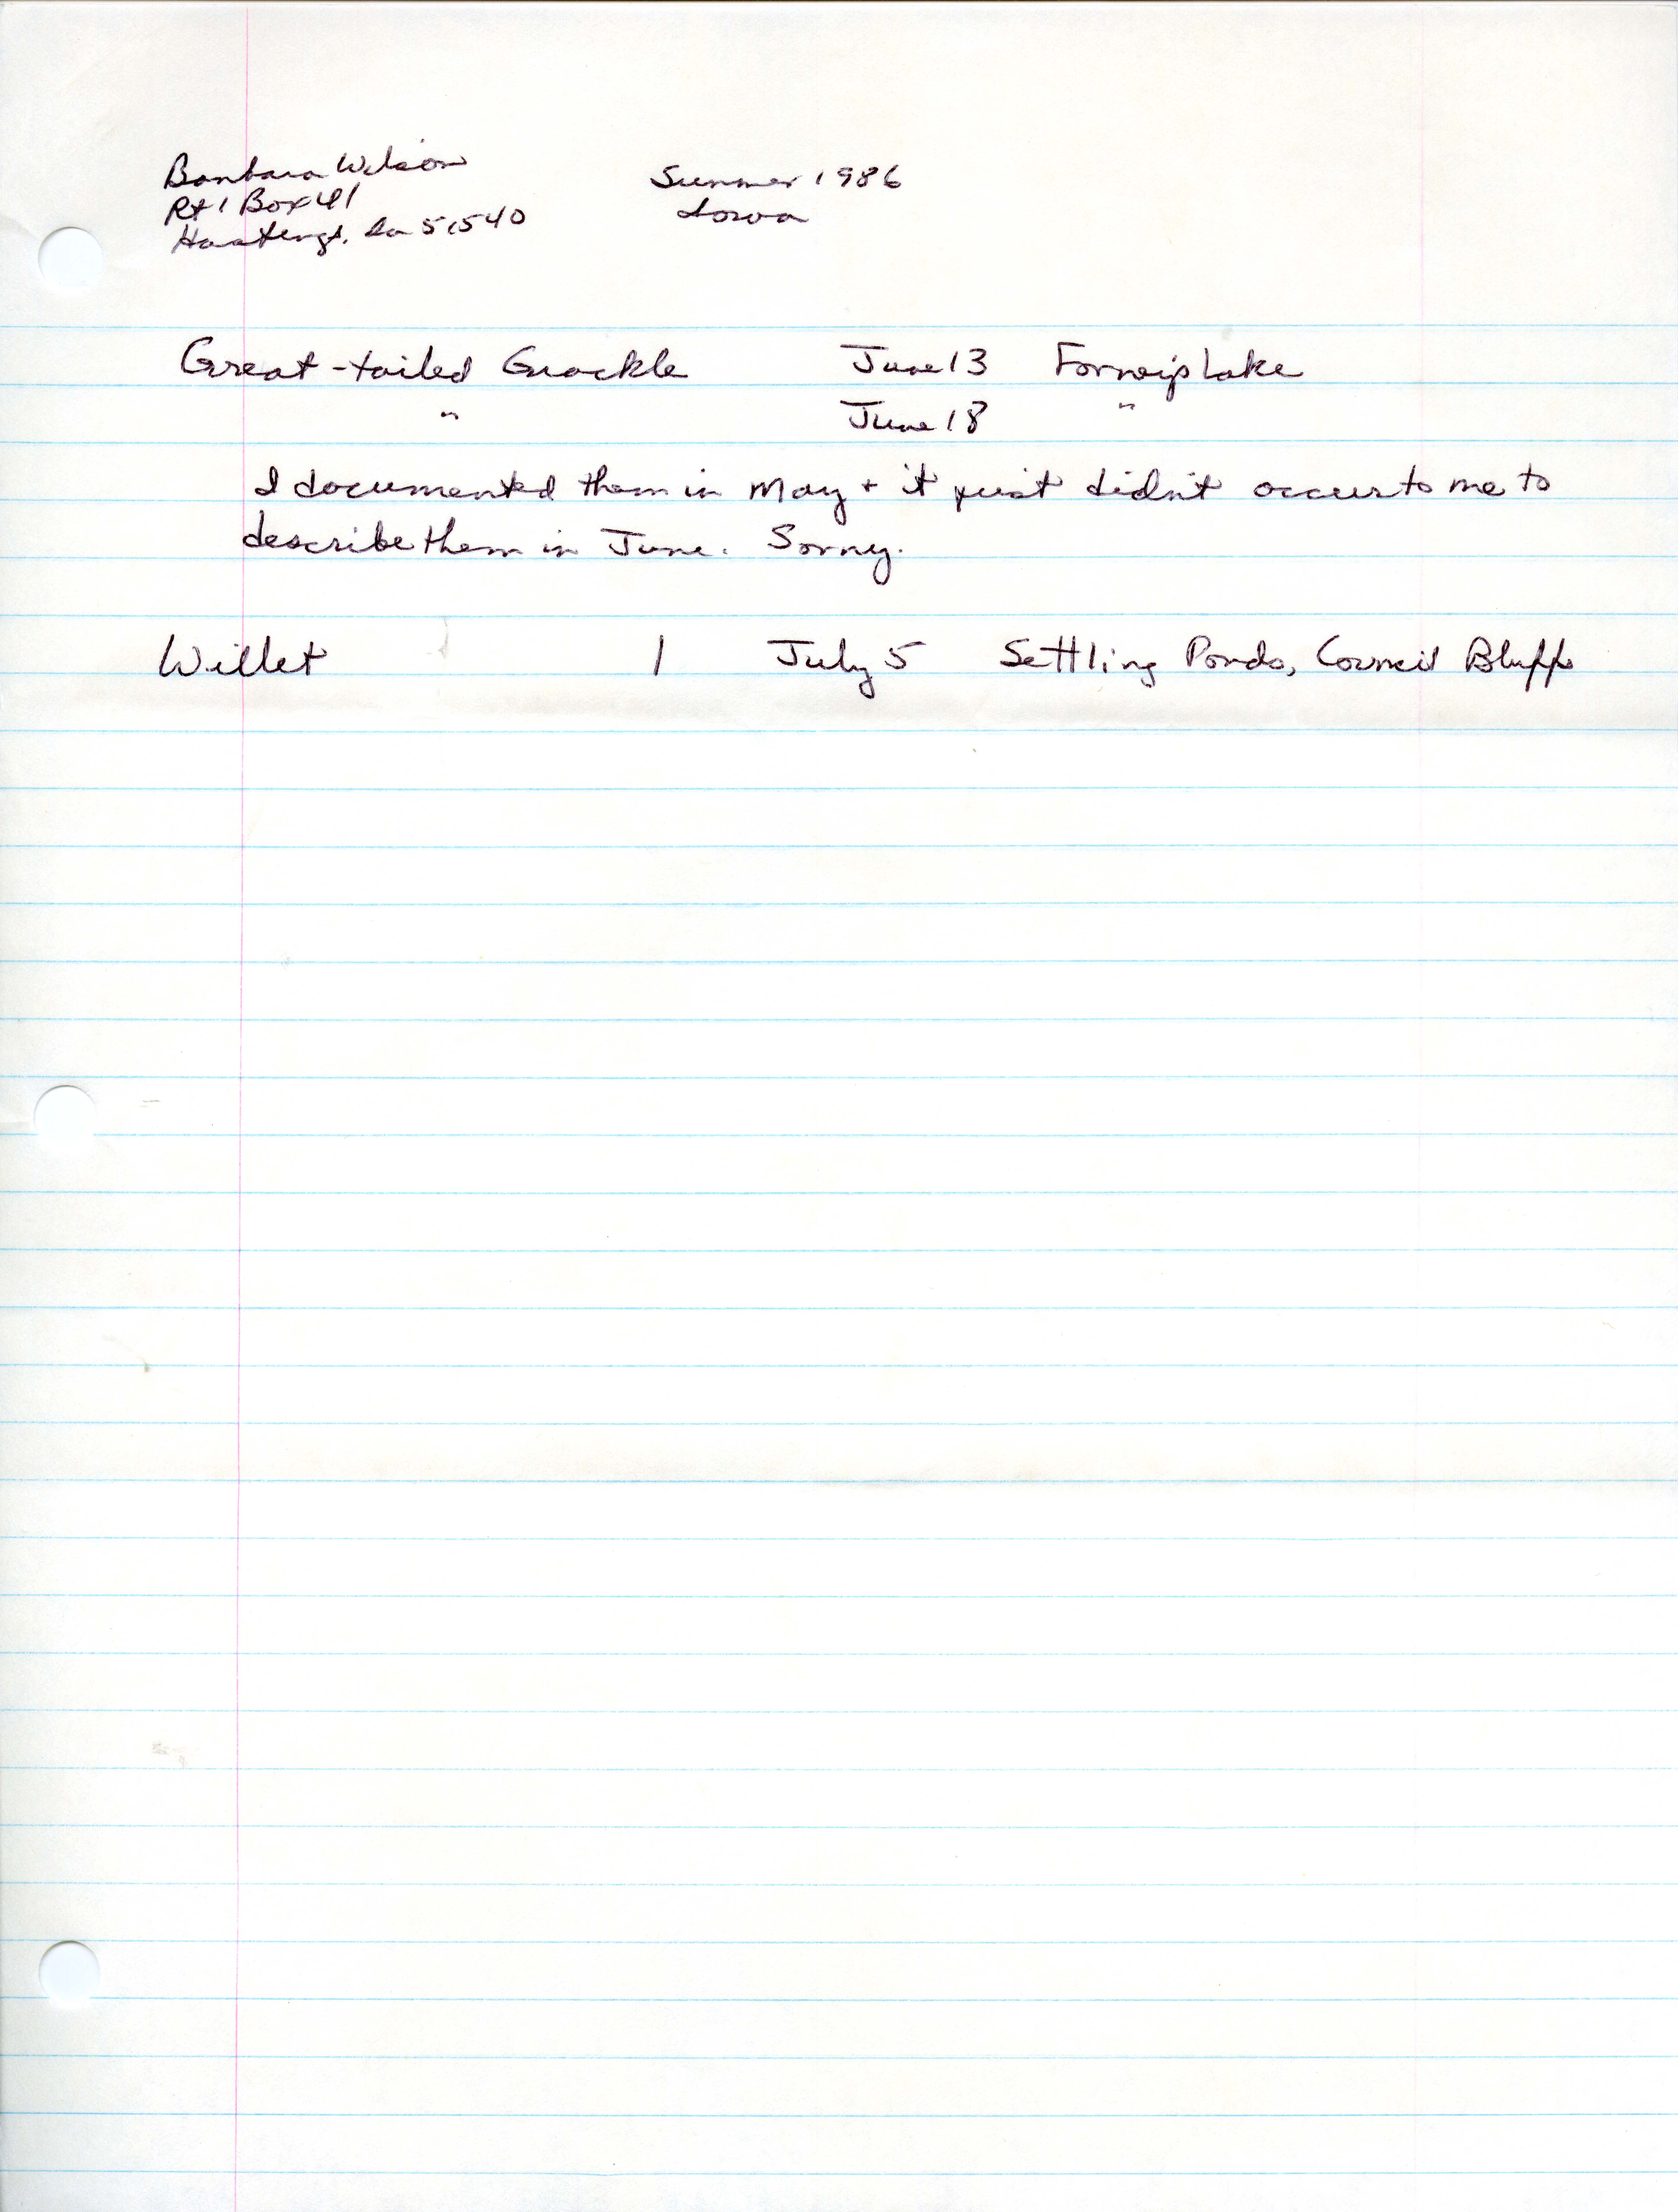 Field notes contributed by Barbara L. Wilson, summer 1986